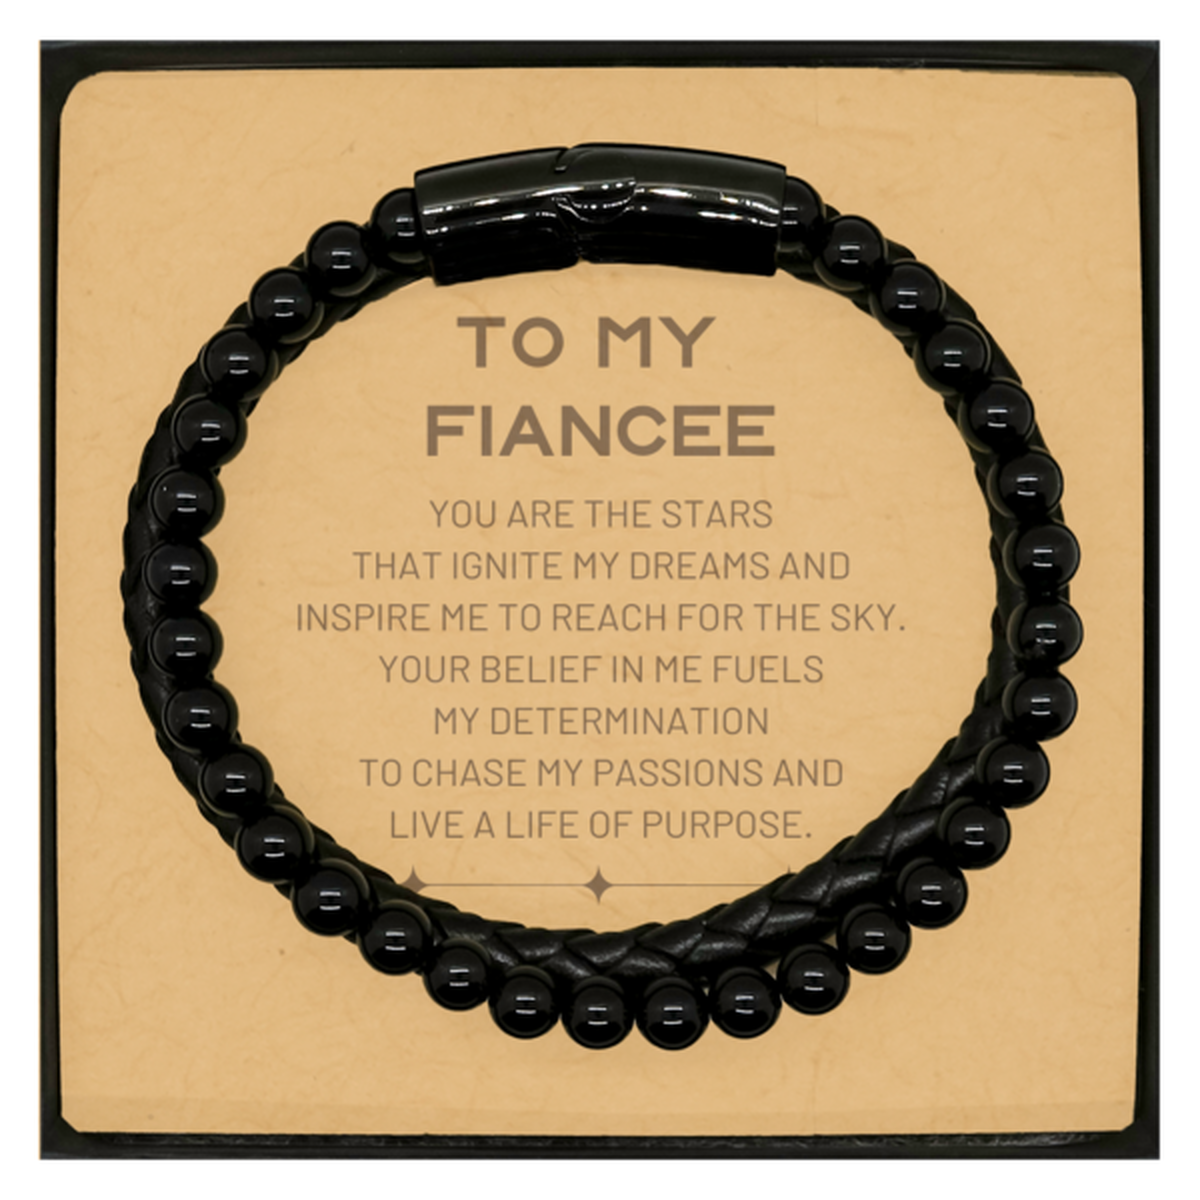 To My Fiancee Stone Leather Bracelets, You are the stars that ignite my dreams and inspire me to reach for the sky, Birthday Christmas Unique Gifts For Fiancee, Thank You Gifts For Fiancee